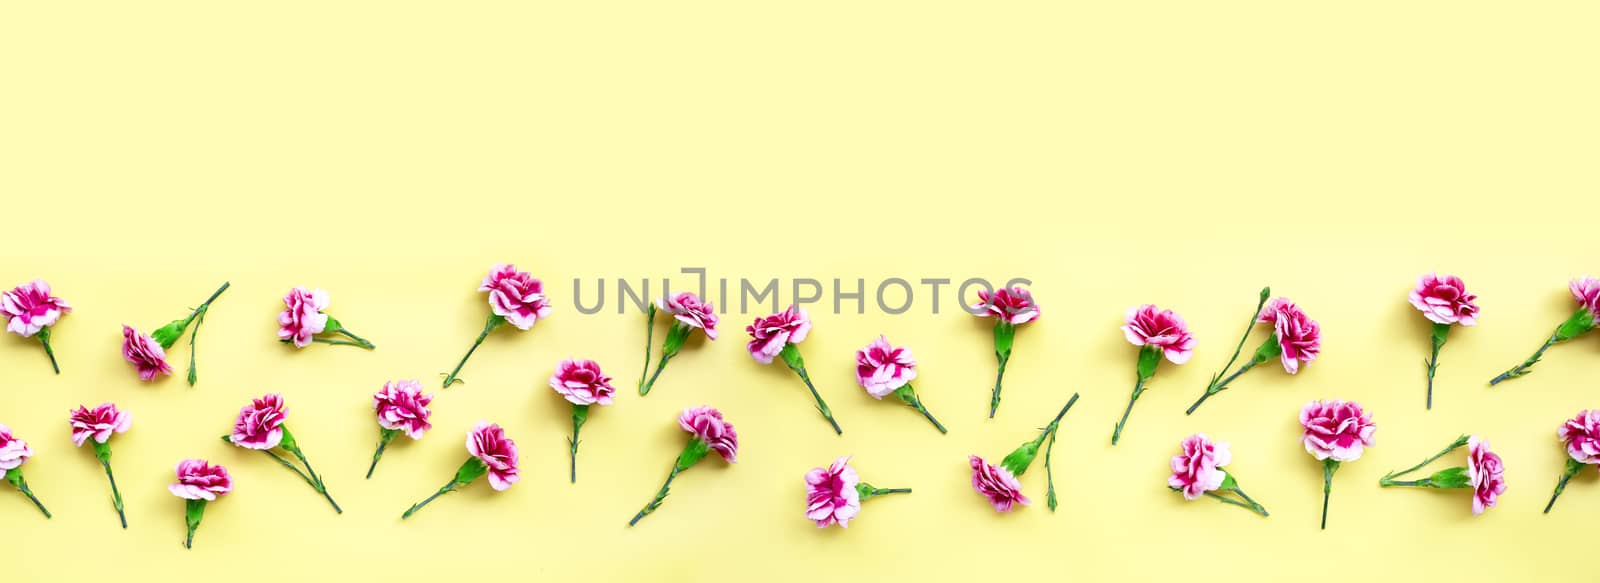 Carnation flower on yellow background. Top view